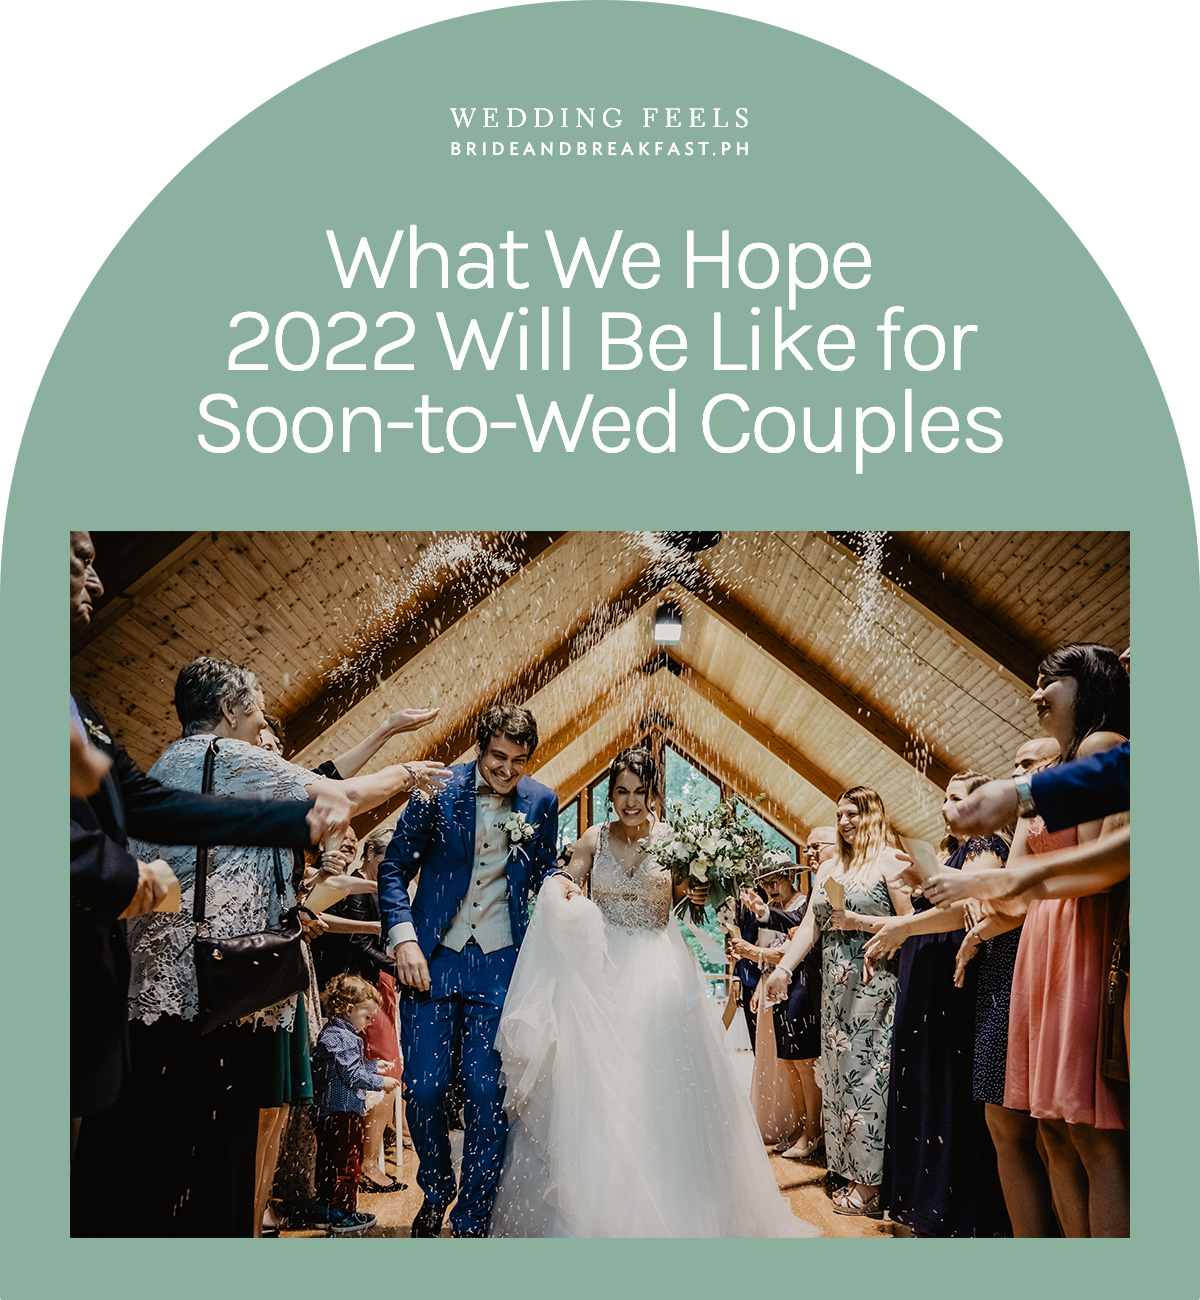 What We Hope 2022 Will Be Like for Soon-to-Wed Couples